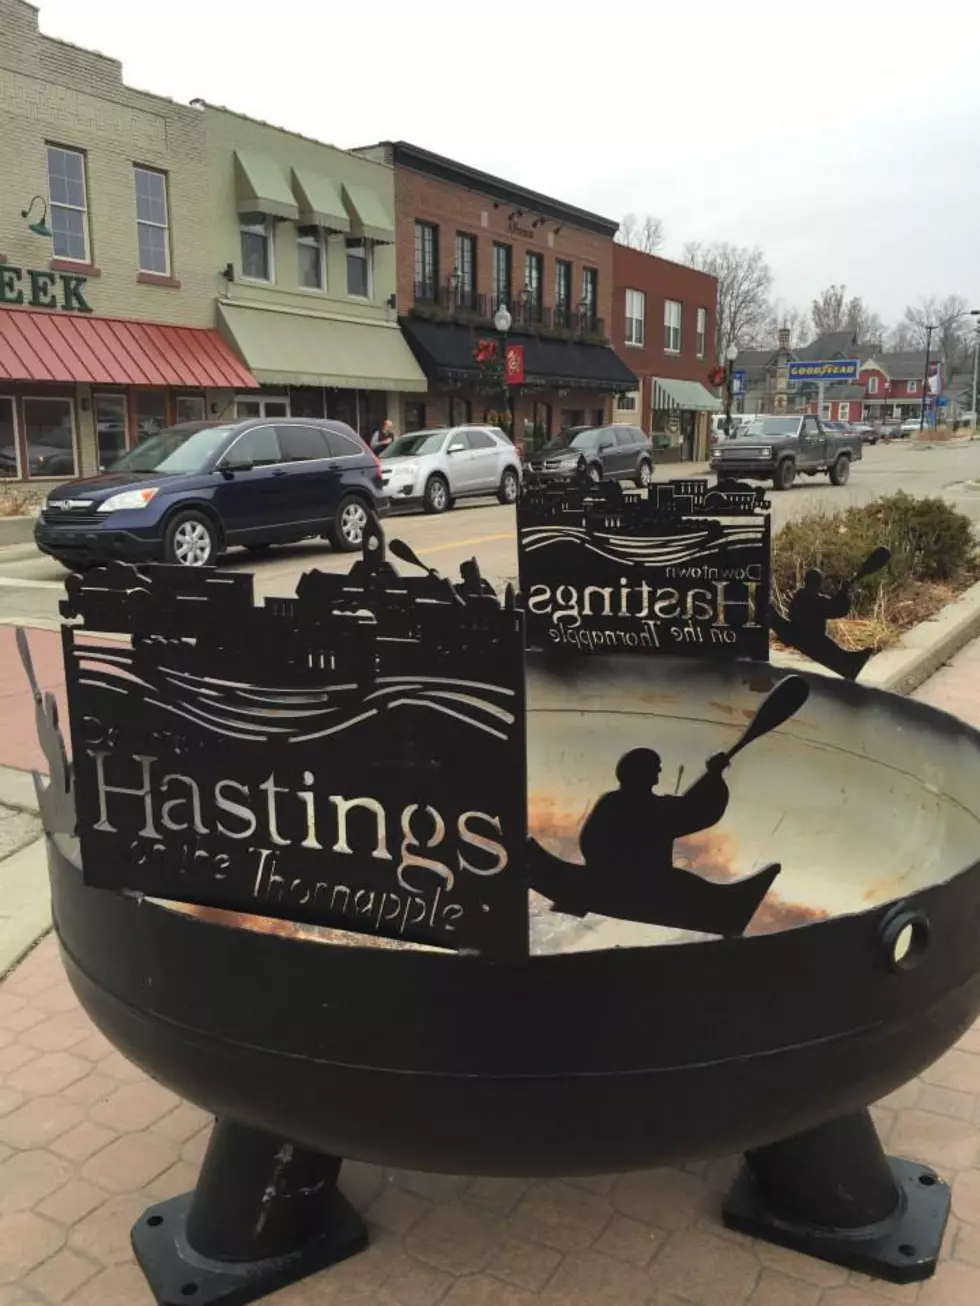 Can We Talk About Hastings, Michigan For A Minute?